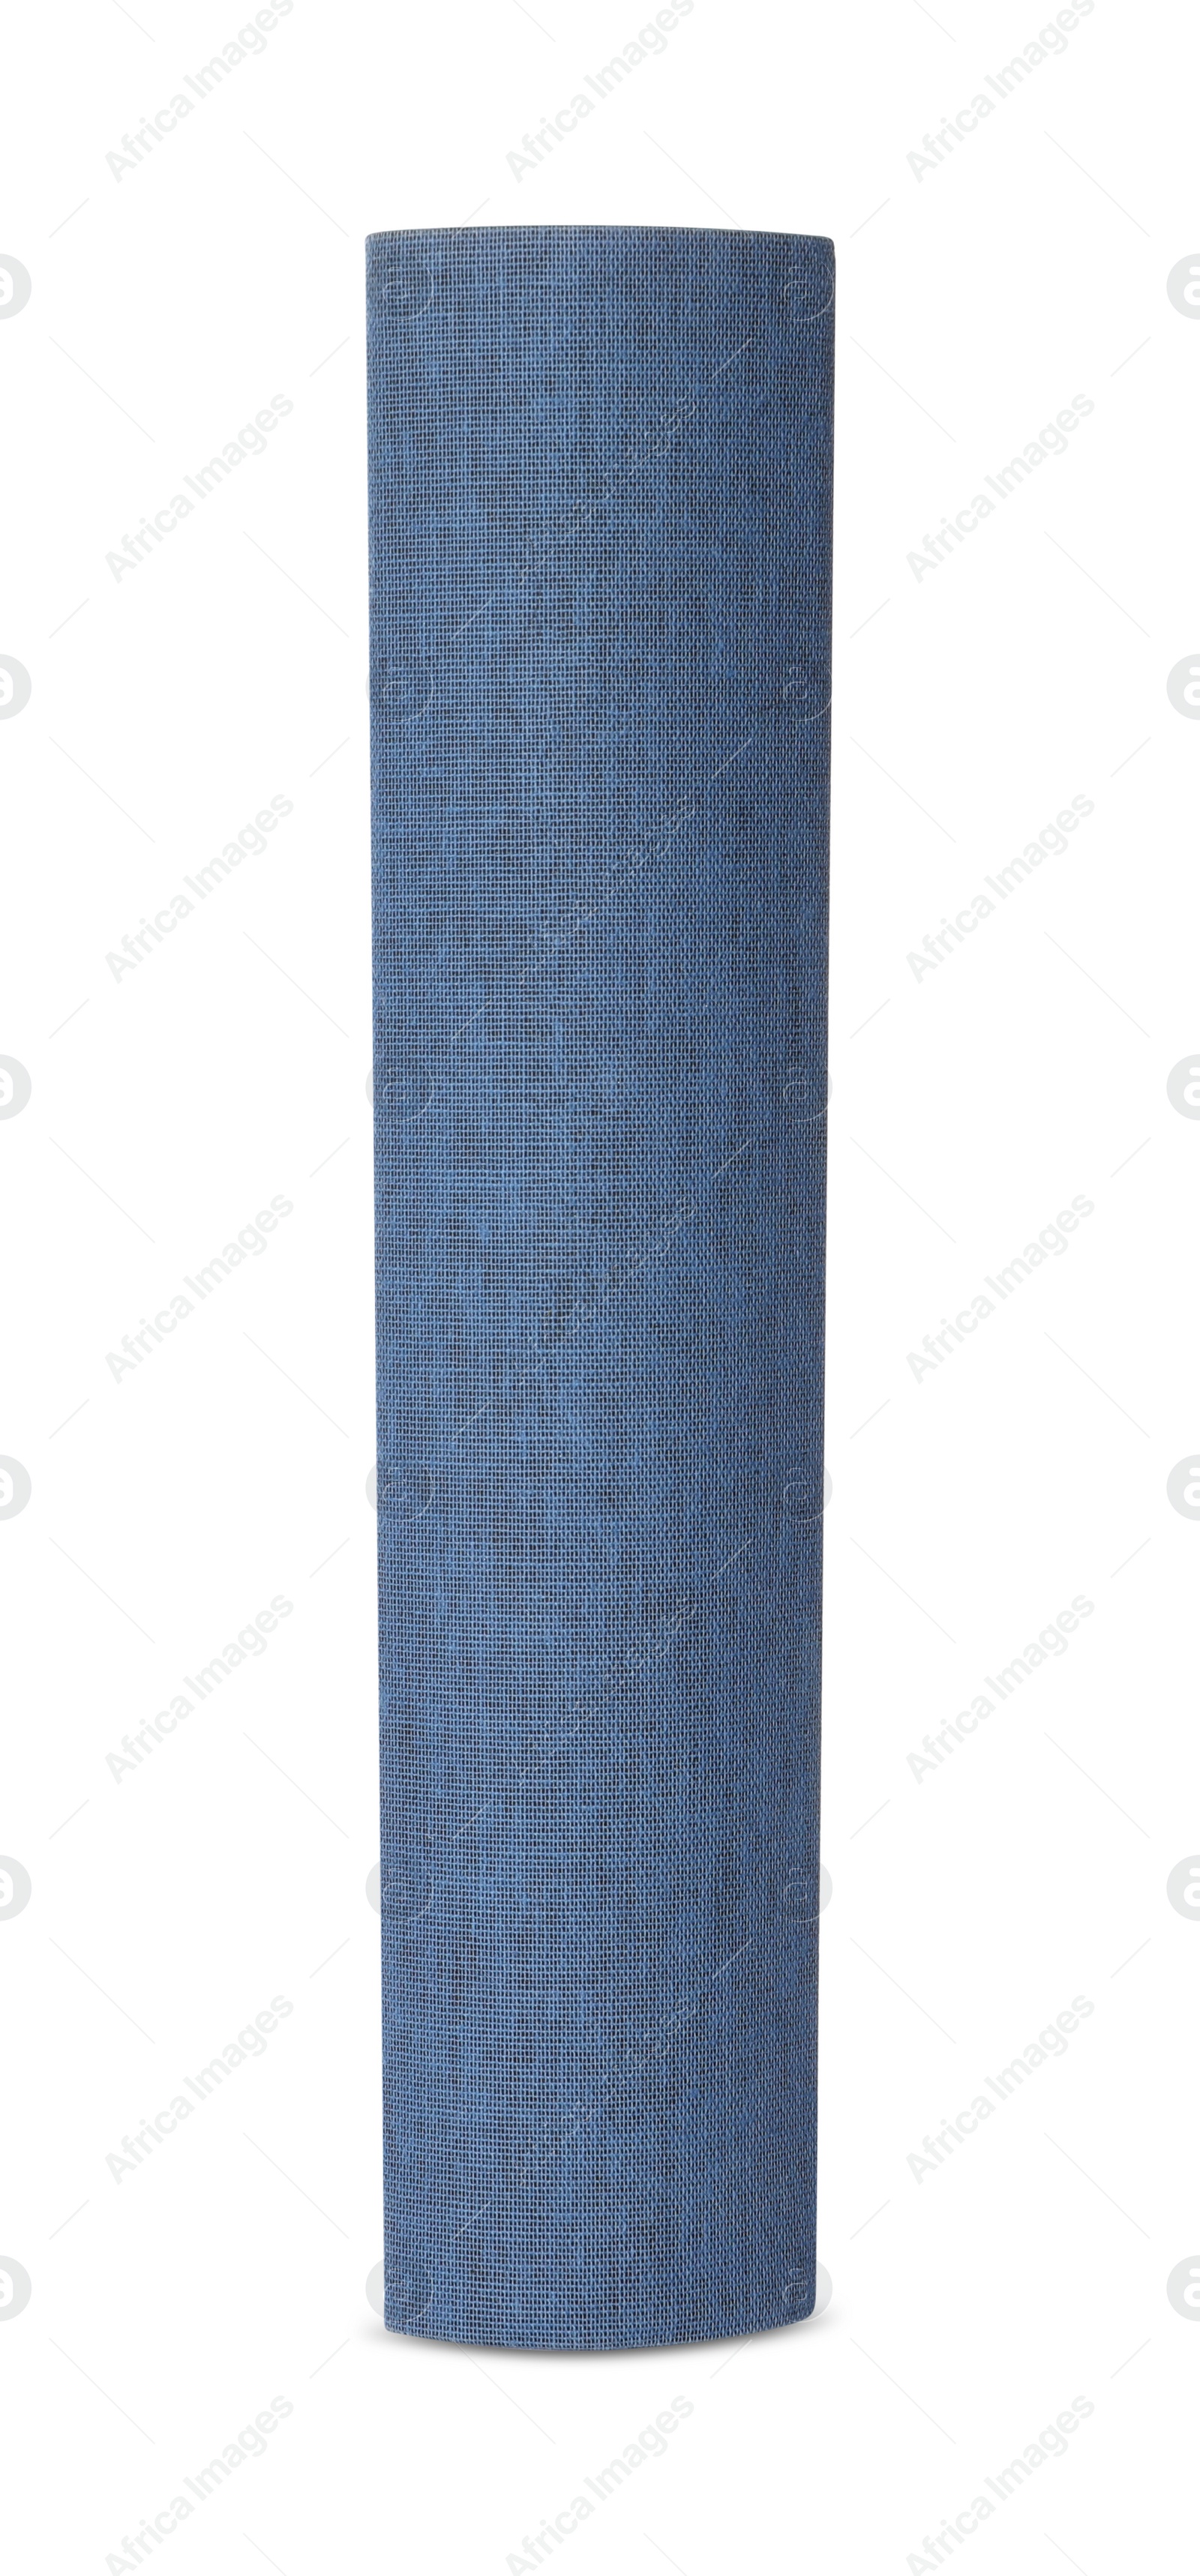 Photo of Closed book with light blue cover isolated on white